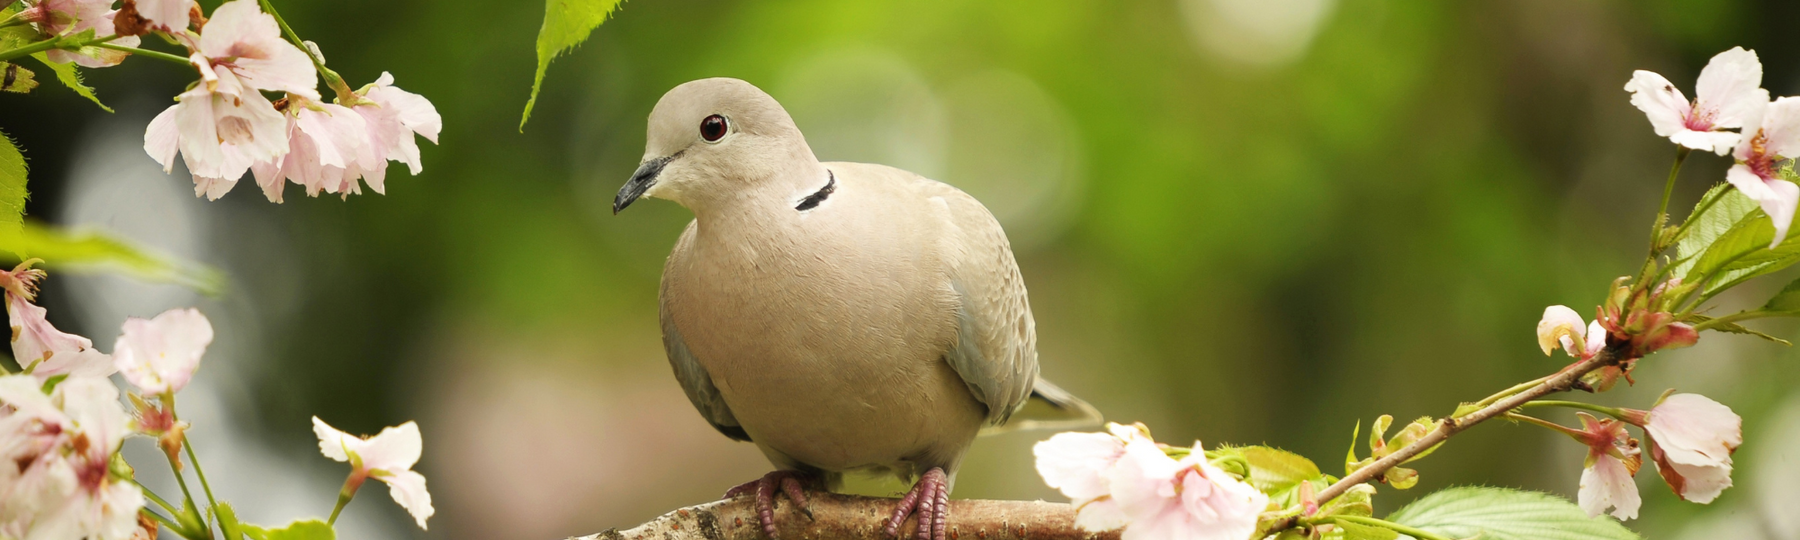 8 Fun Facts about Doves